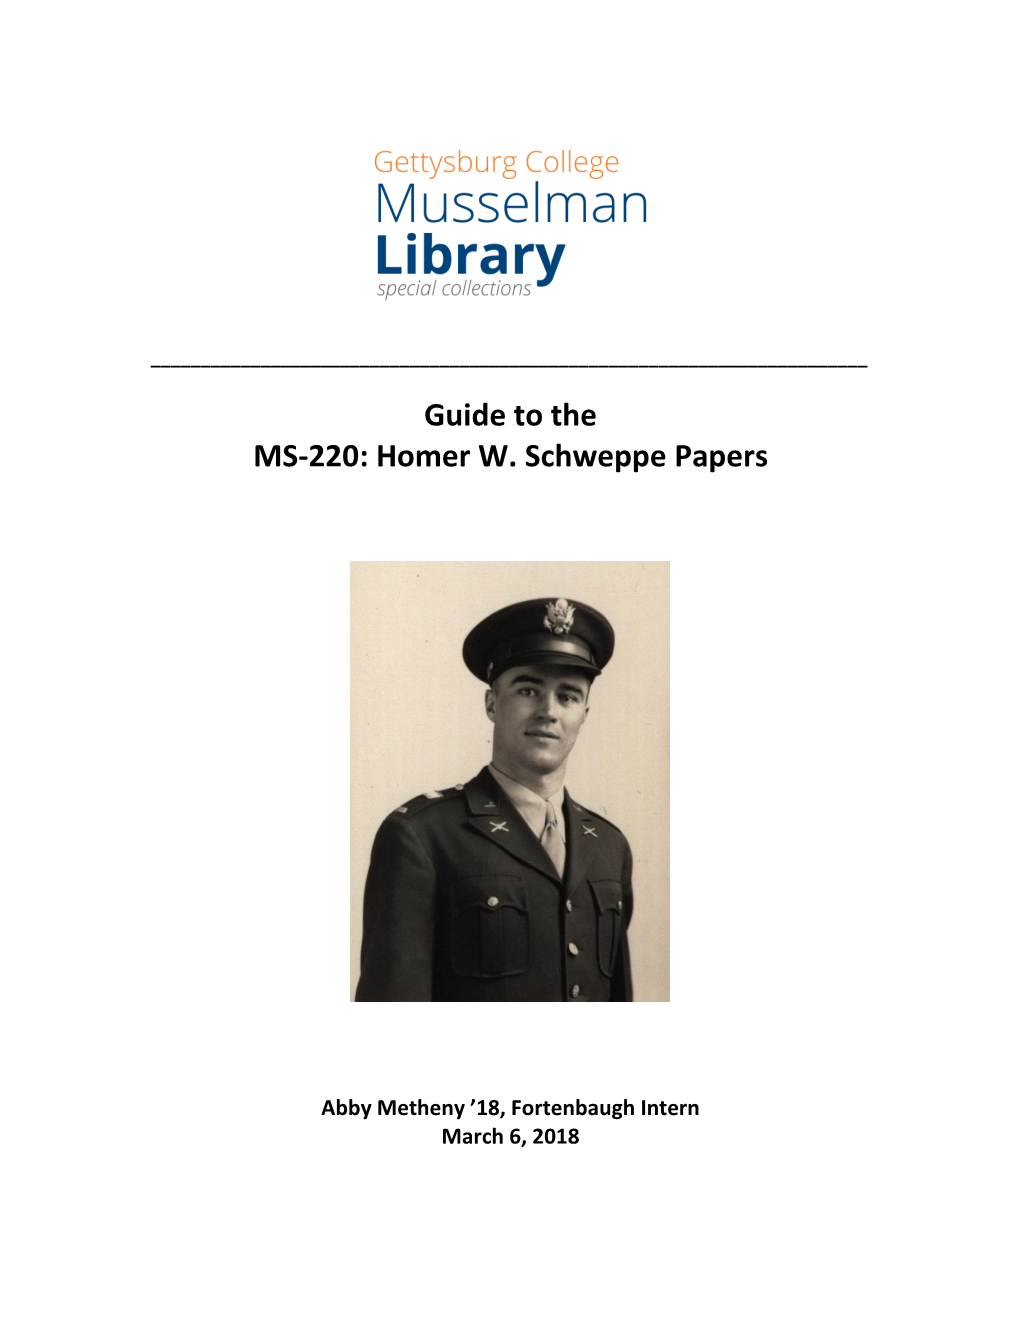 Guide to the MS-220: Homer W. Schweppe Papers